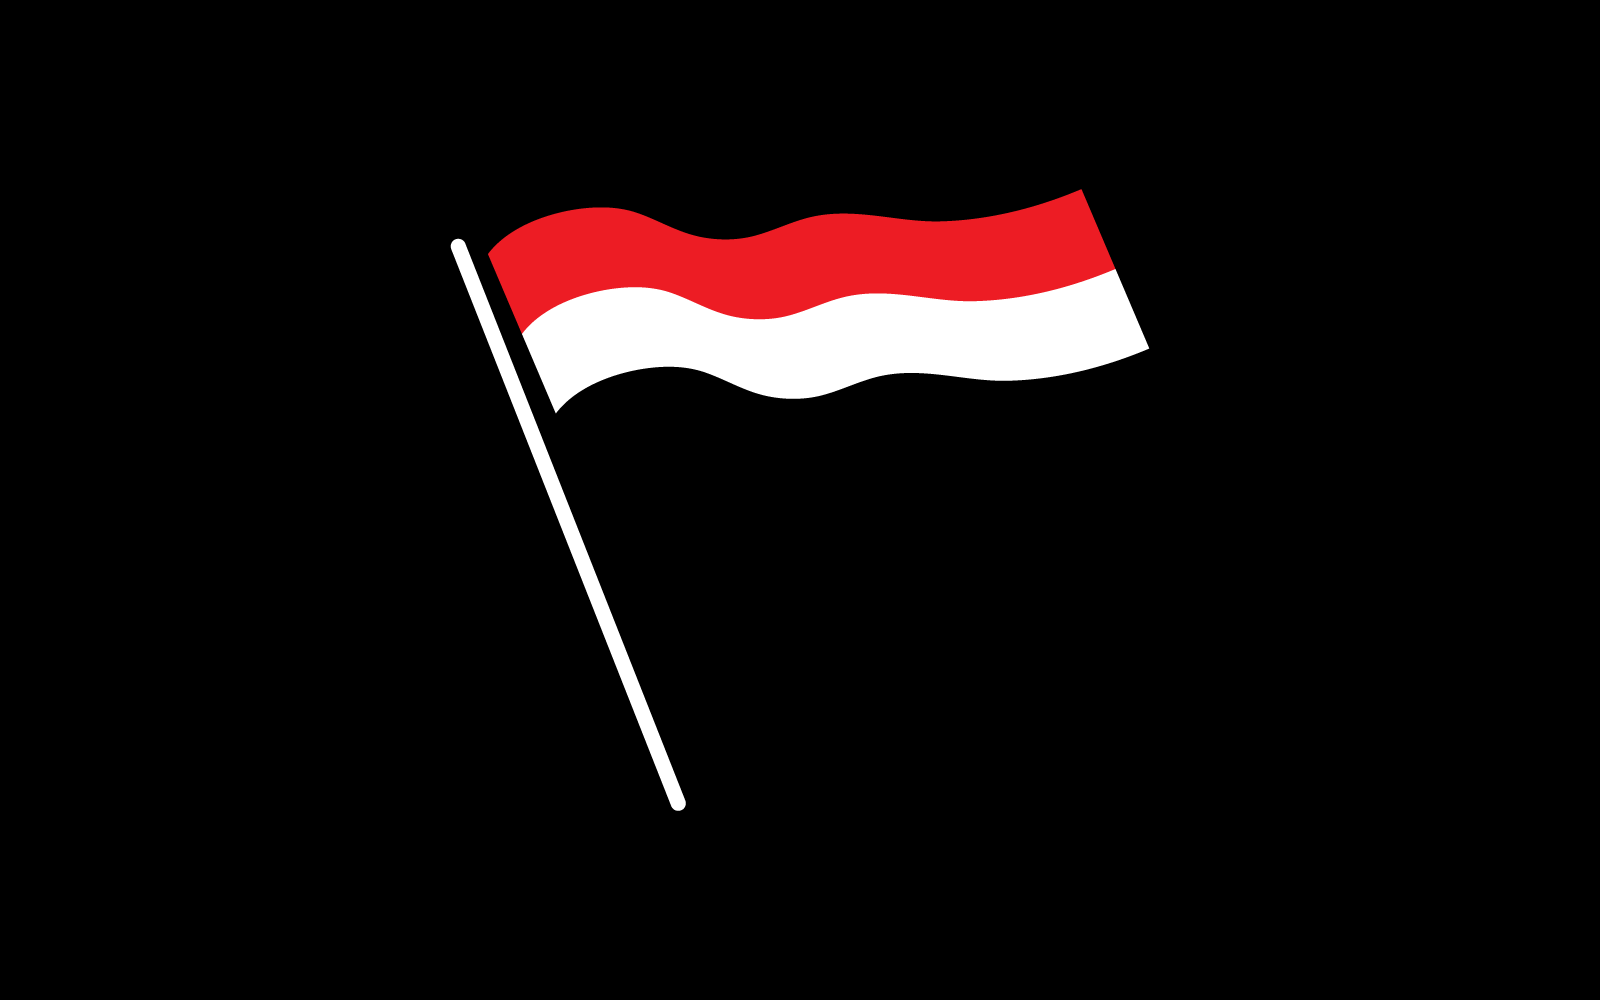 Flag of Indonesia red and white vector illustration